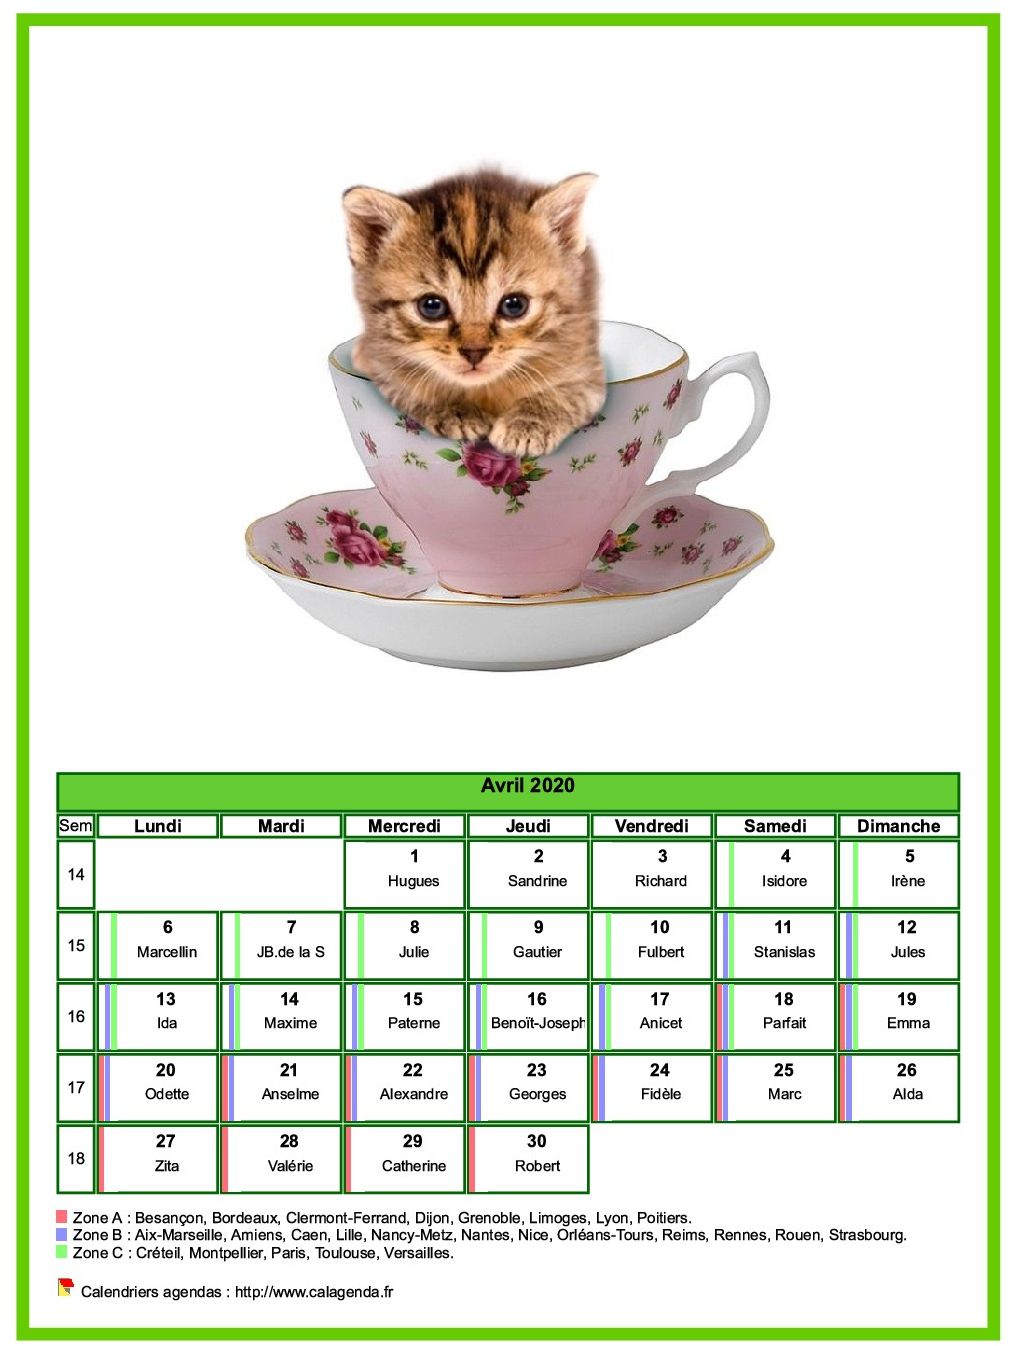 Calendrier avril 2020 chats